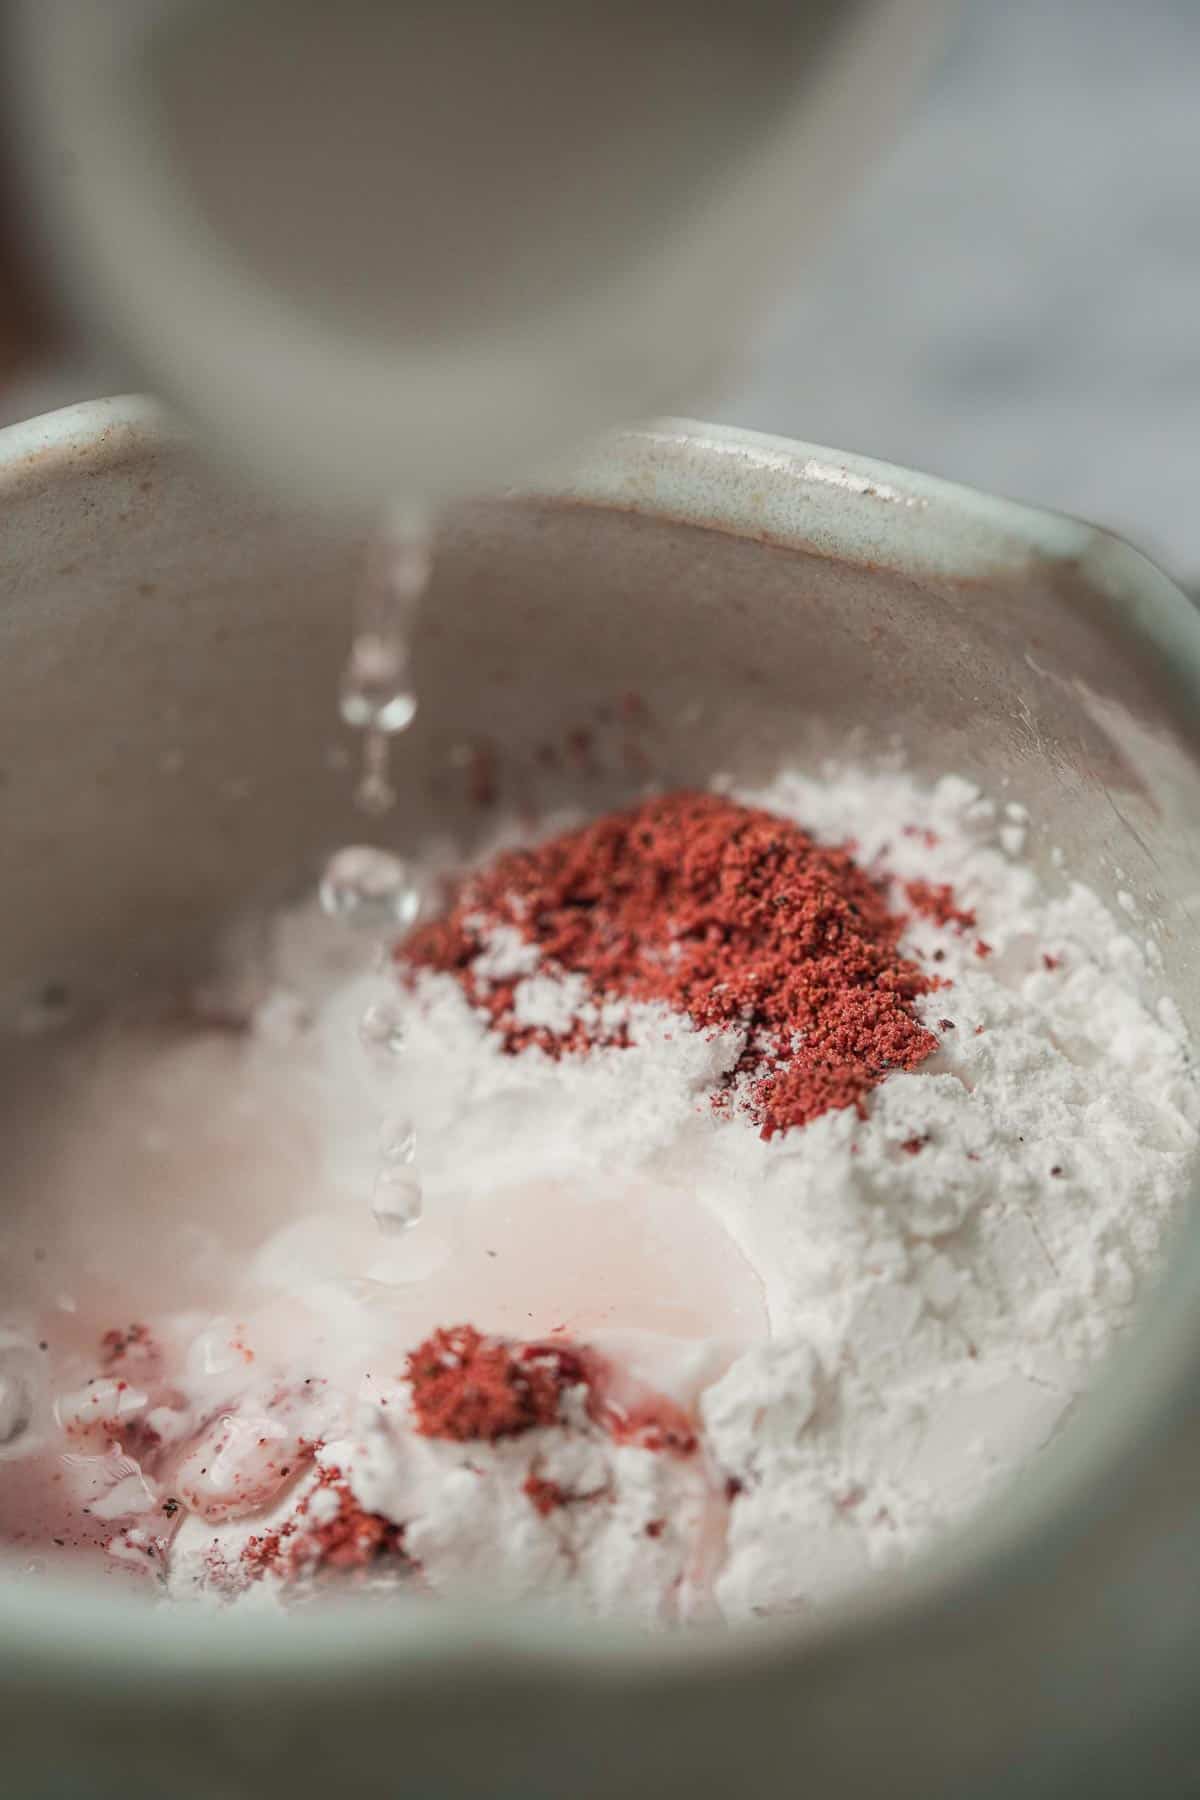 A person is pouring boiling water into a bowl with tapioca starch and pitaya powder.